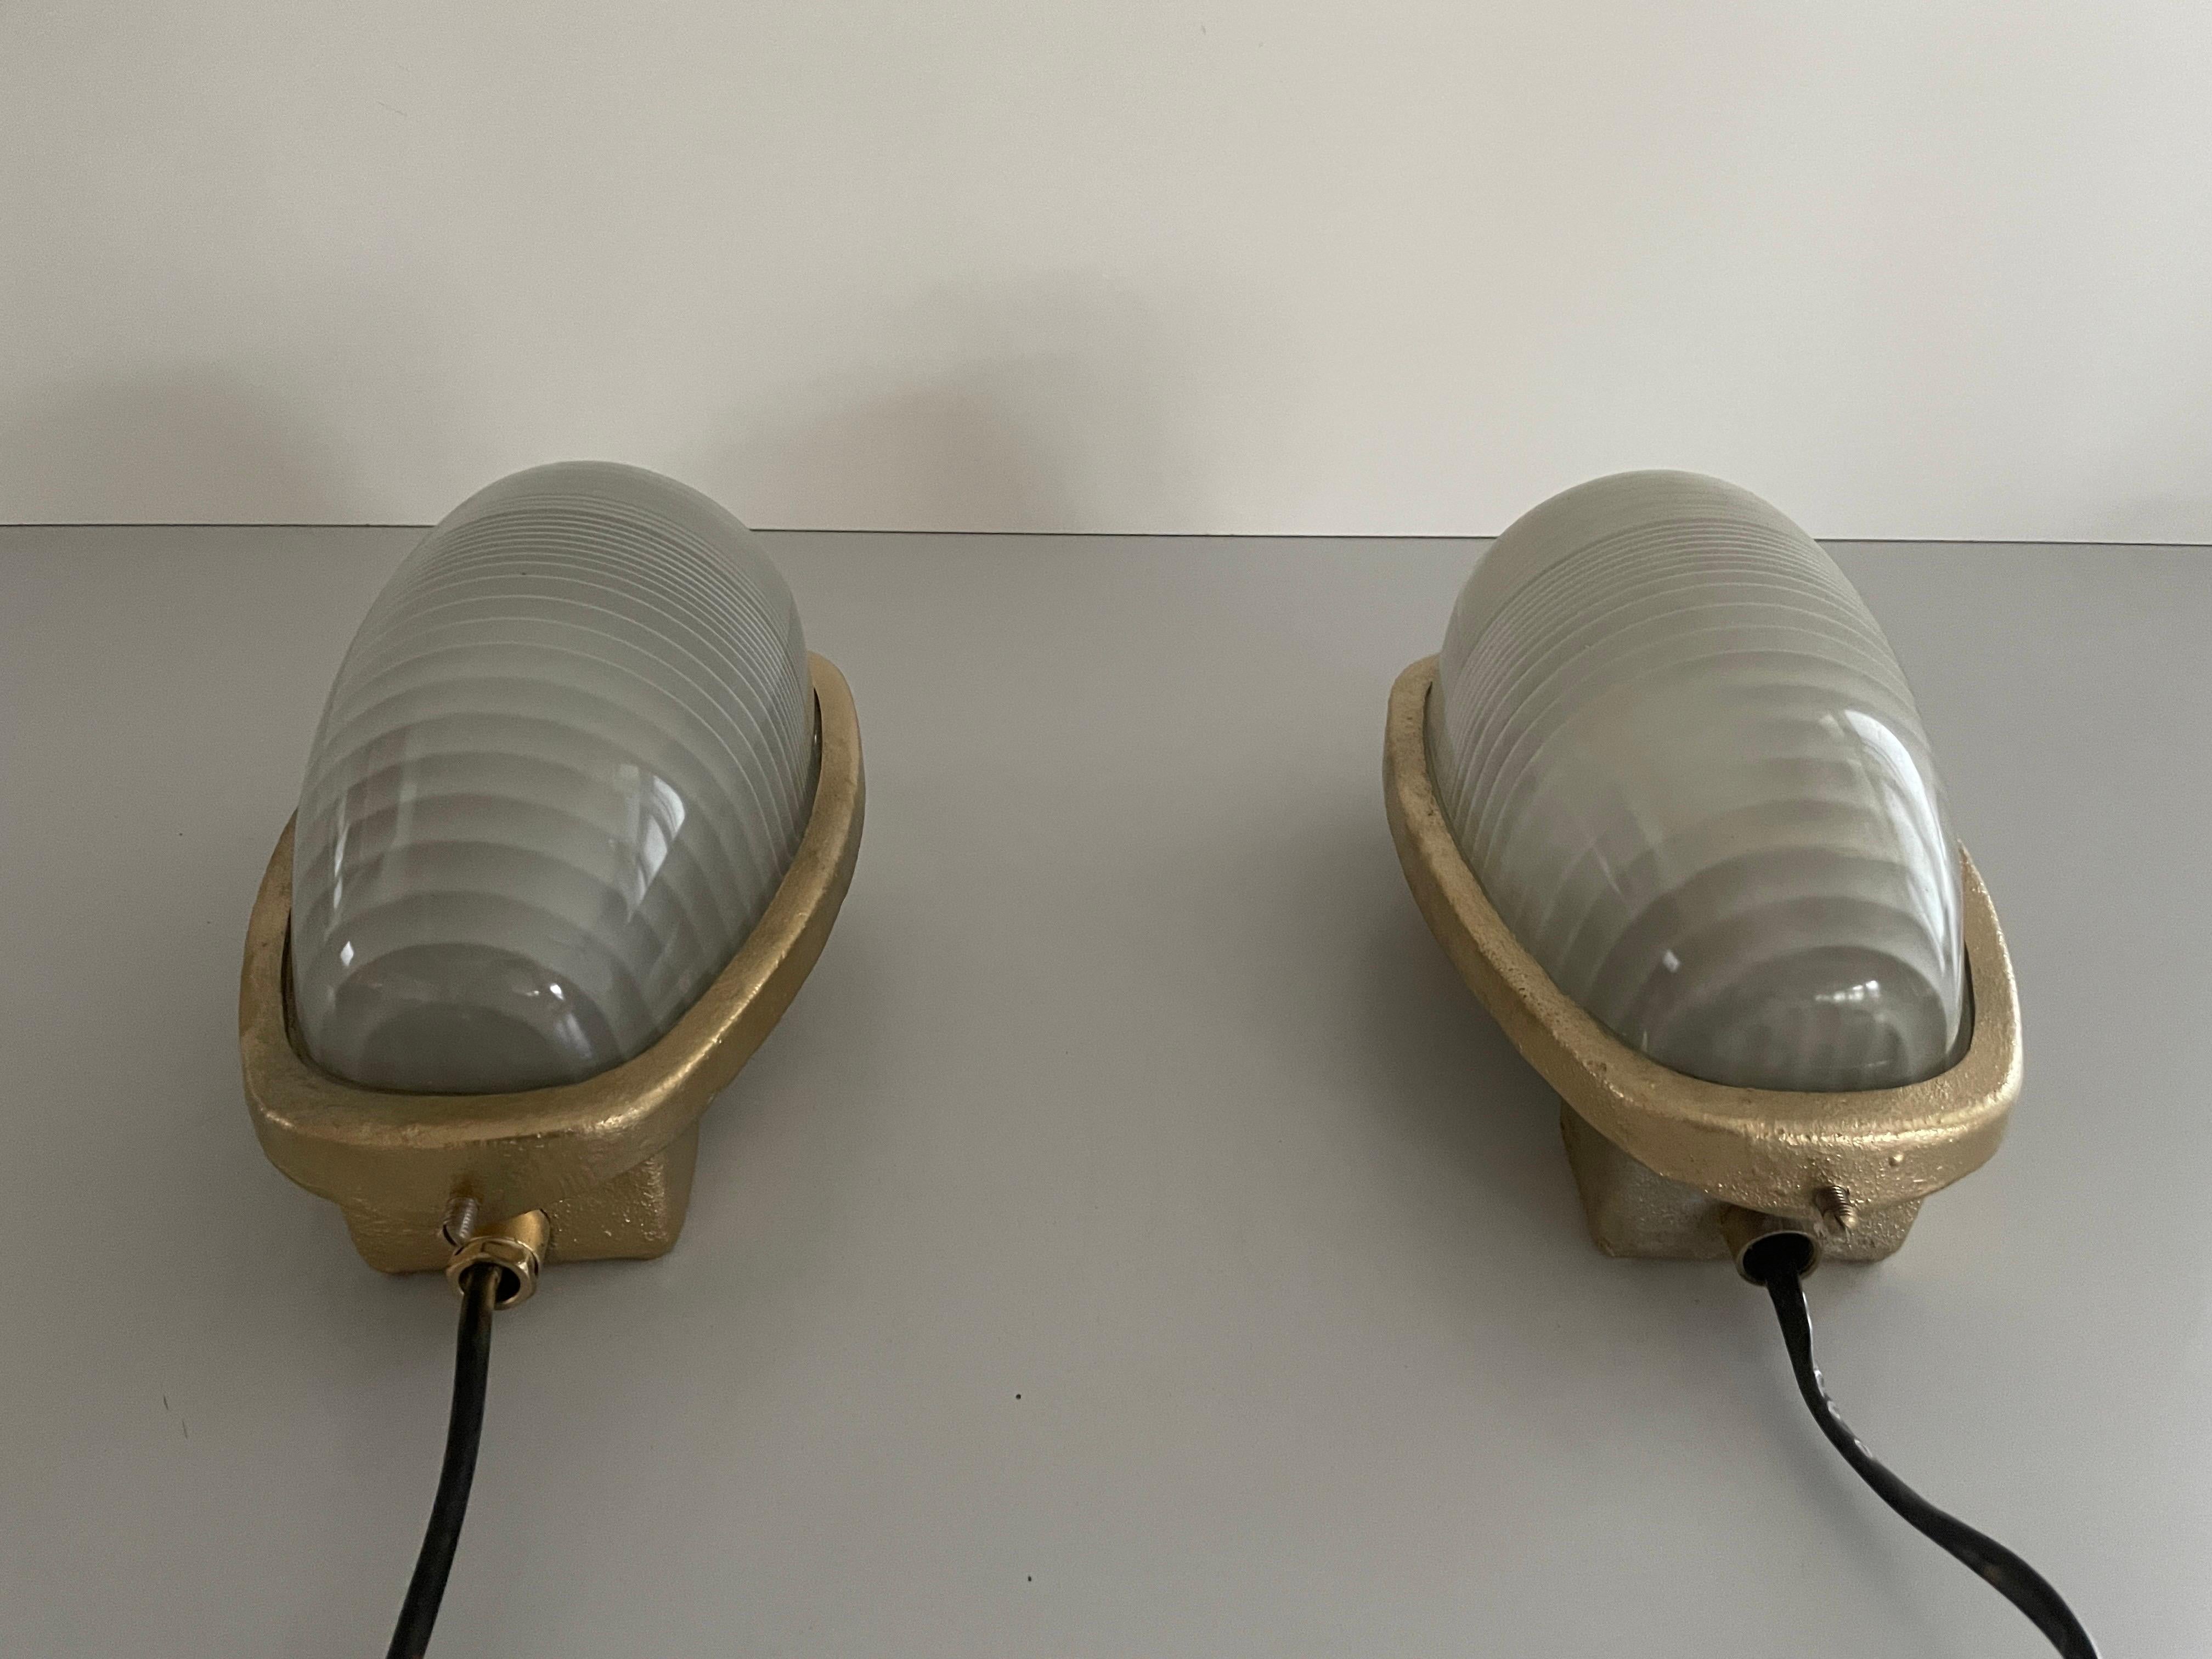 Glass and Gold Coated Brass Pair of Industrial Sconces by Lambda, 1960s, Italy

Very elegant and Minimalist wall lamps.
These are very heavy outdoor lamps 
Single lamp weight: 4,8 kg

Lamps are in excellent condition.

These lamps works with E27